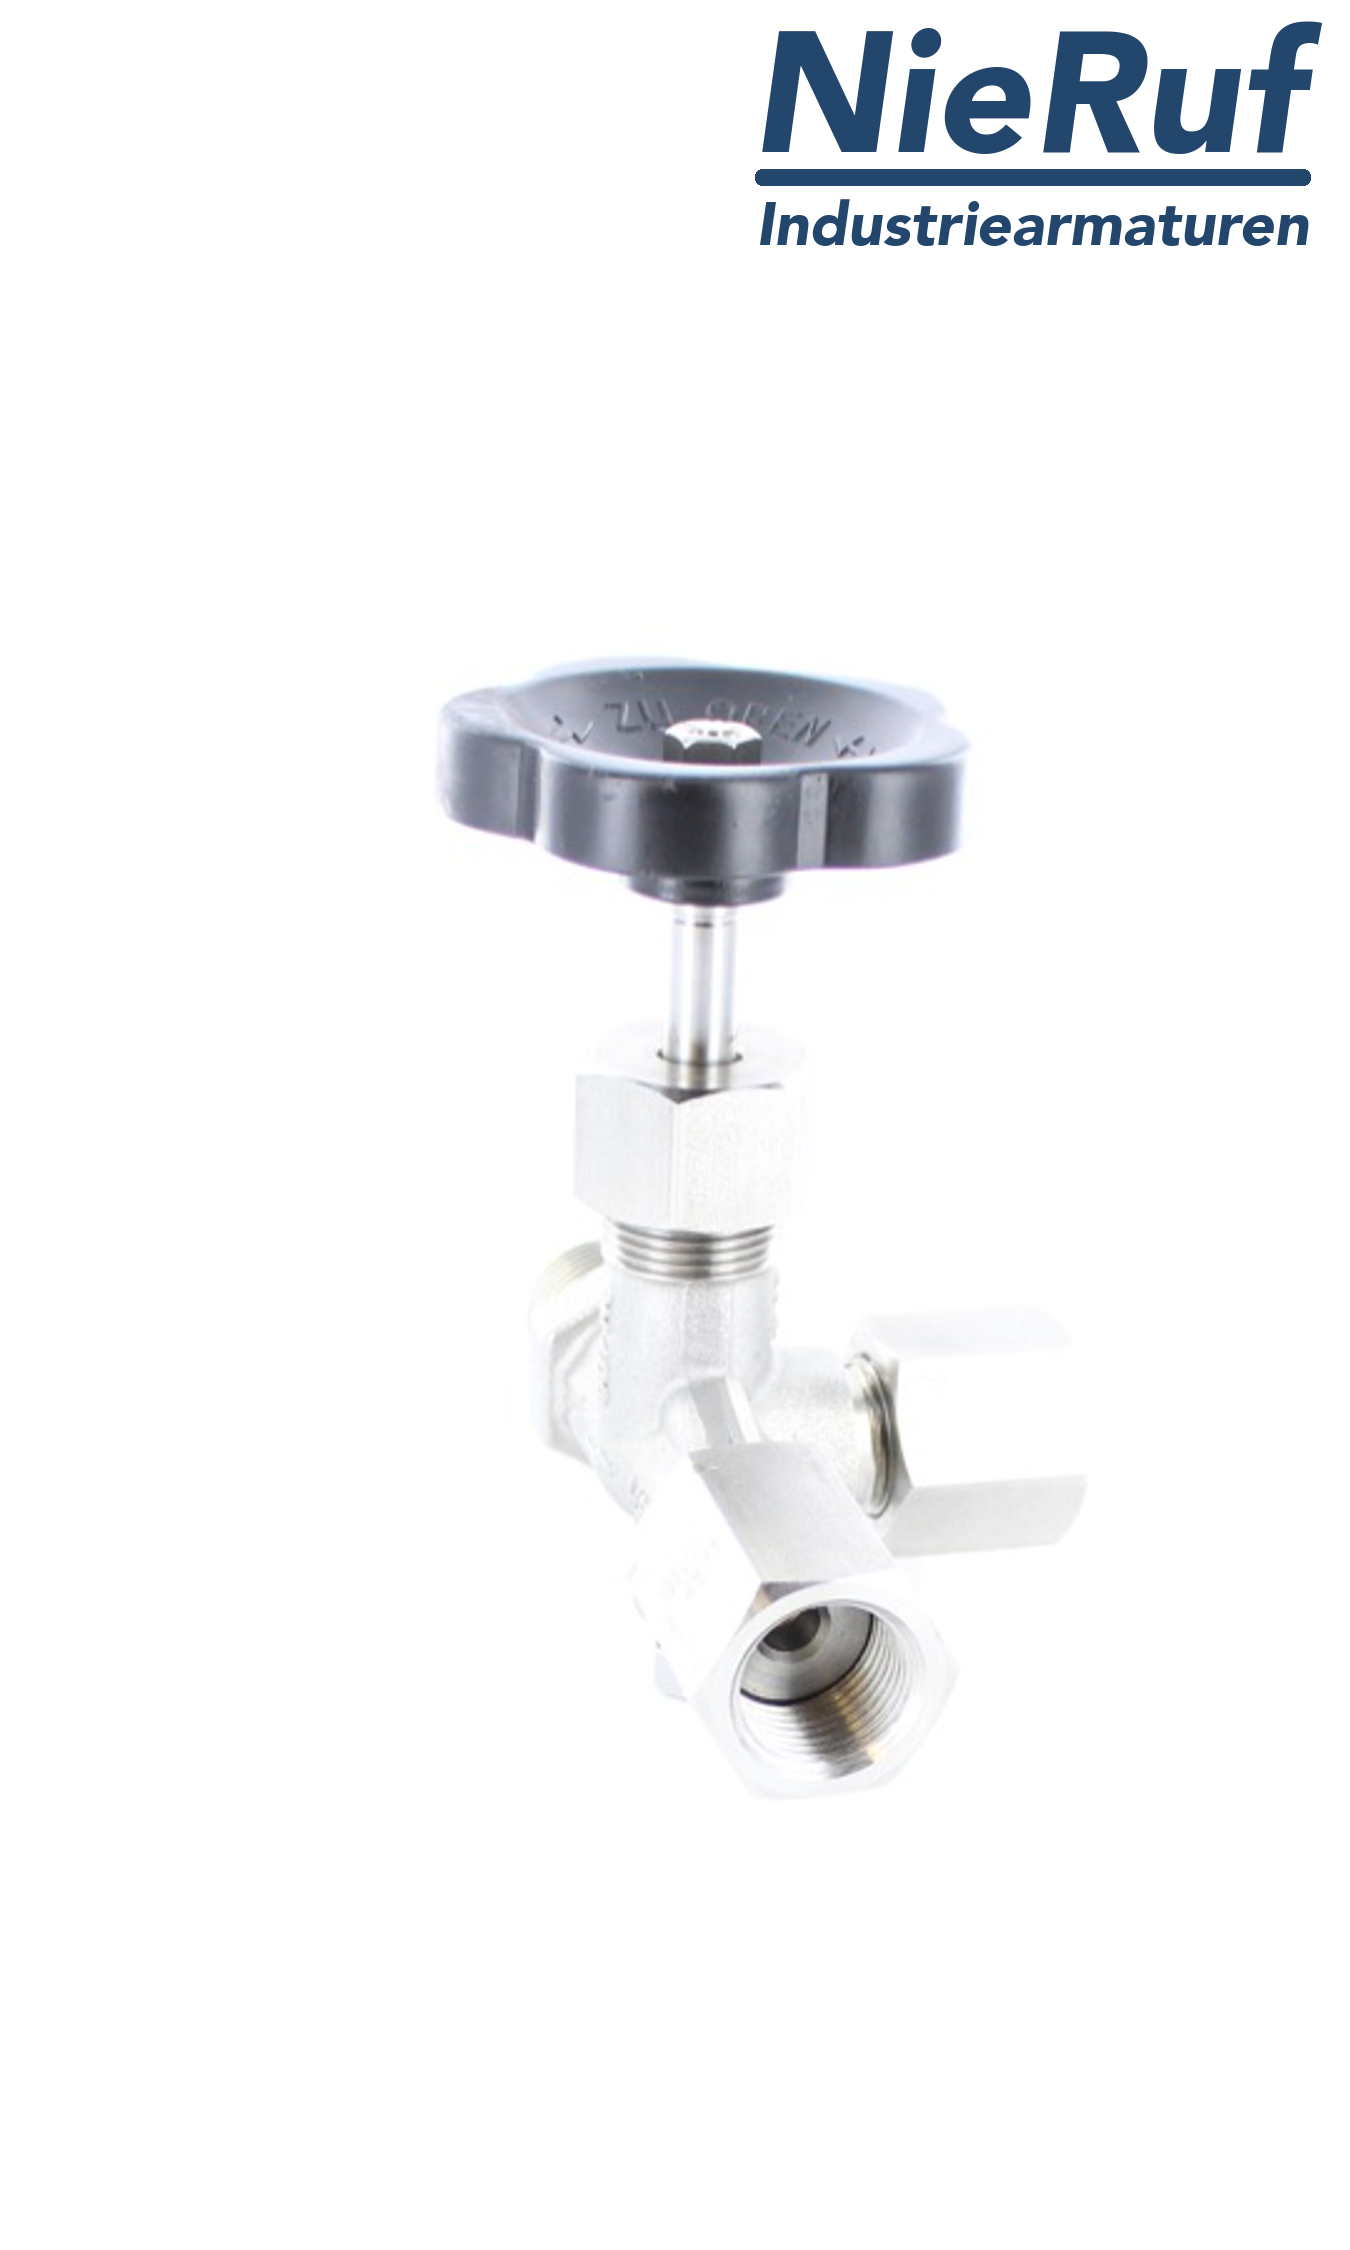 manometer gauge valves male thread x sleeve x test connector M20x1,5 DIN 16271 stainless steel 1.4571 400 bar